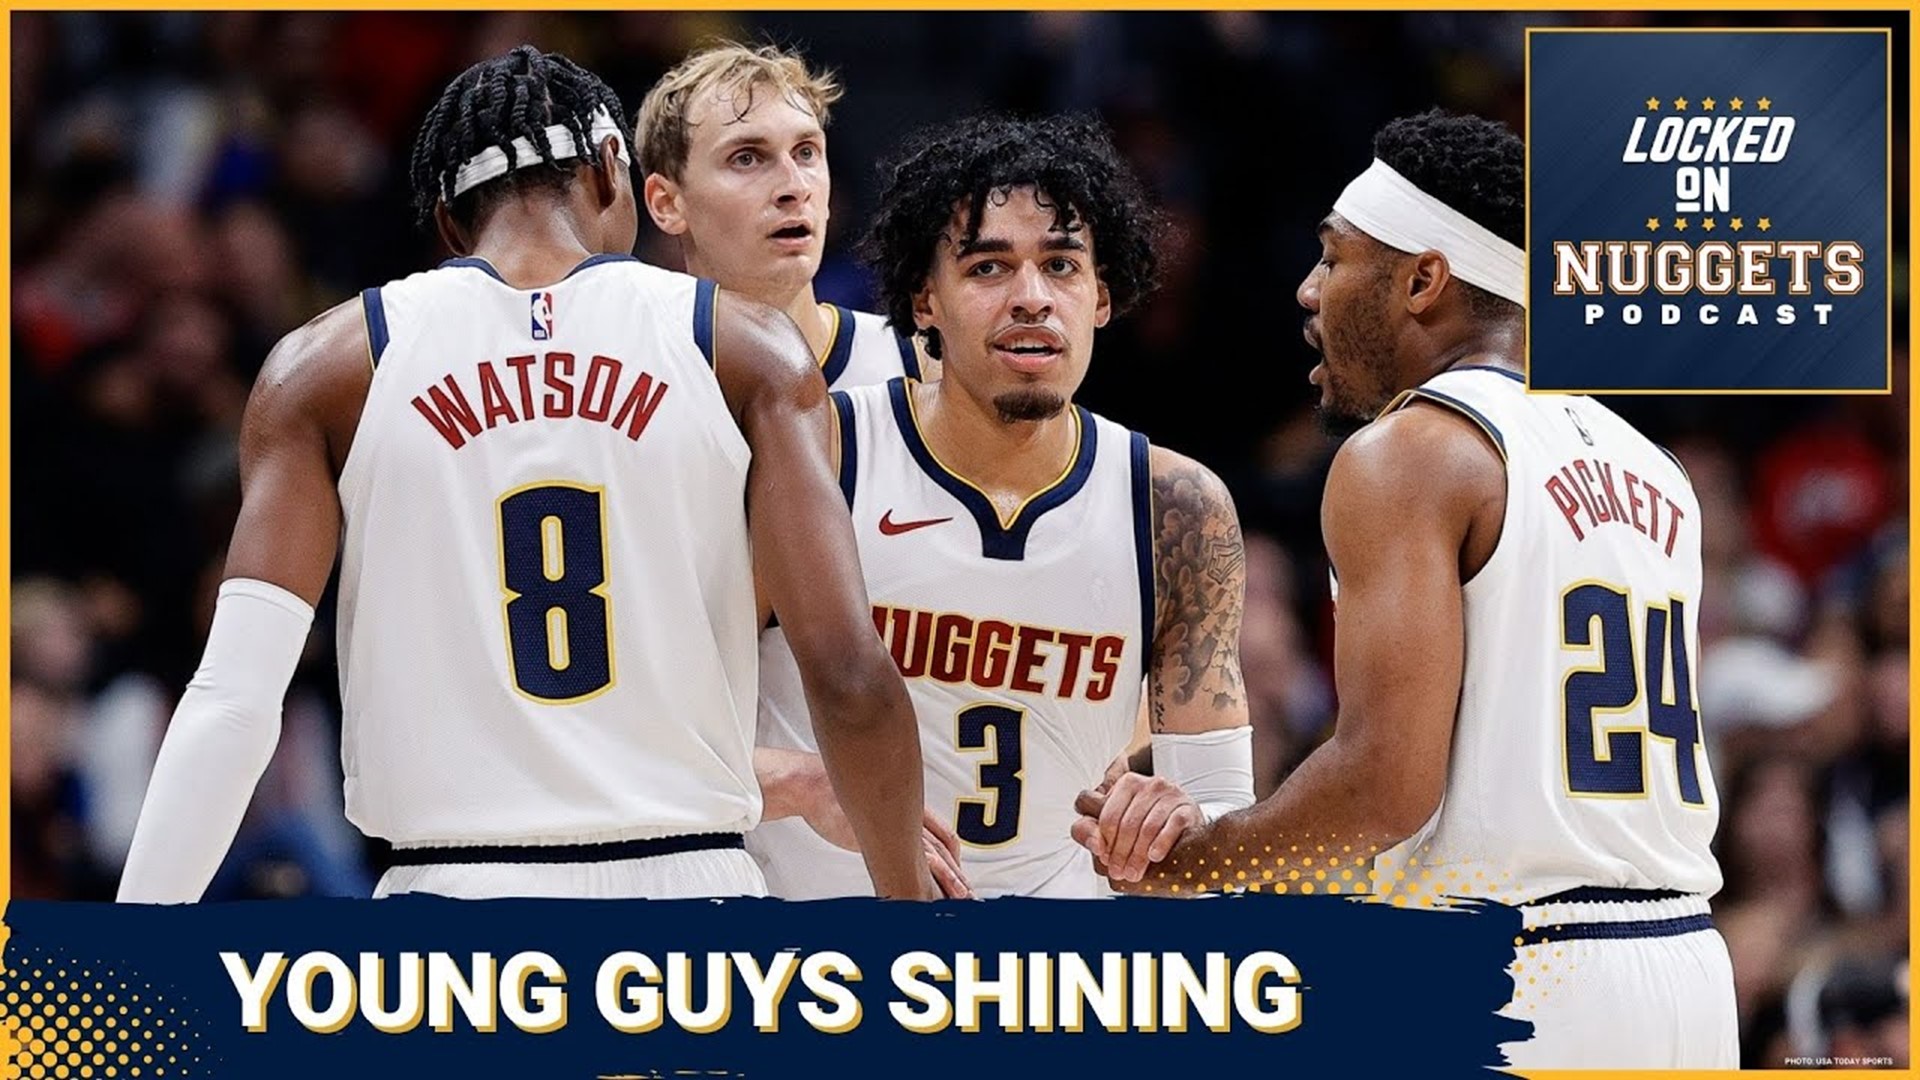 We might have to get used to these Denver Nuggets title wins